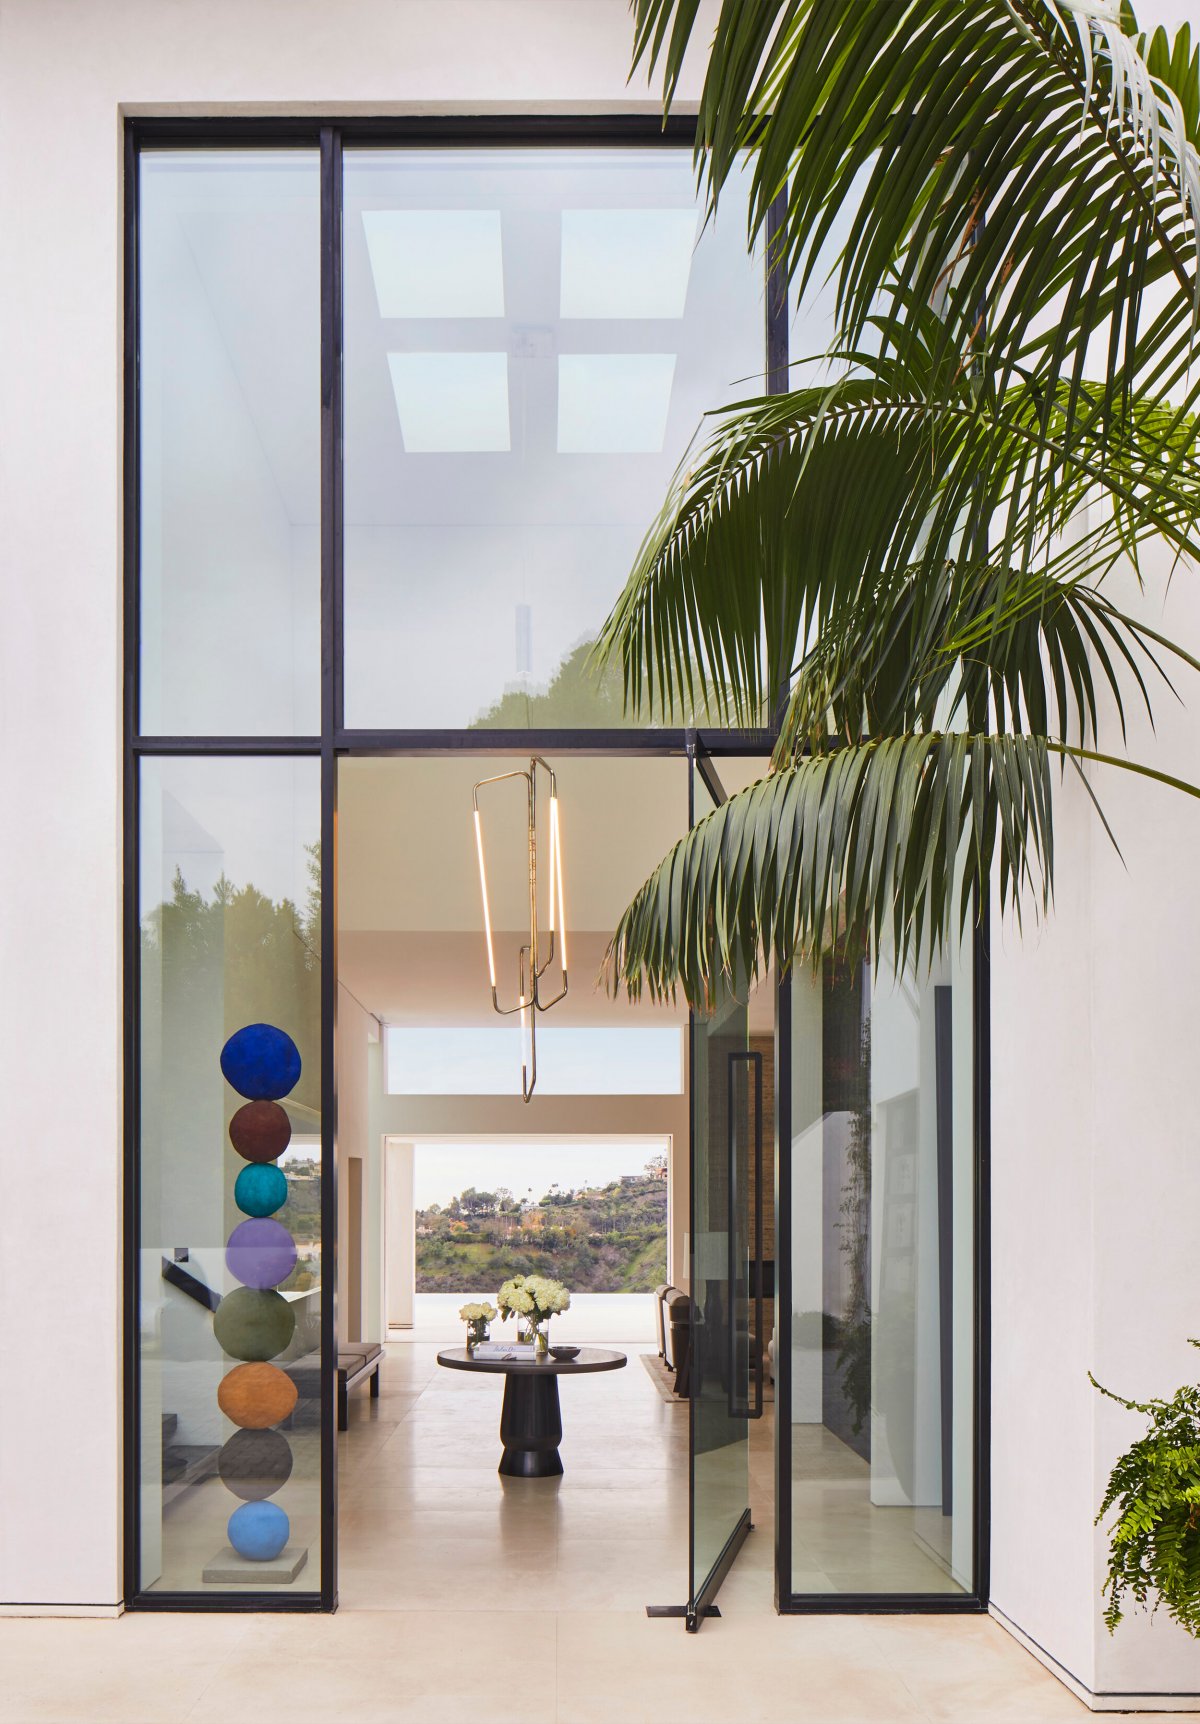 Large glass door with panoramic view. Entryway inspired by nature.